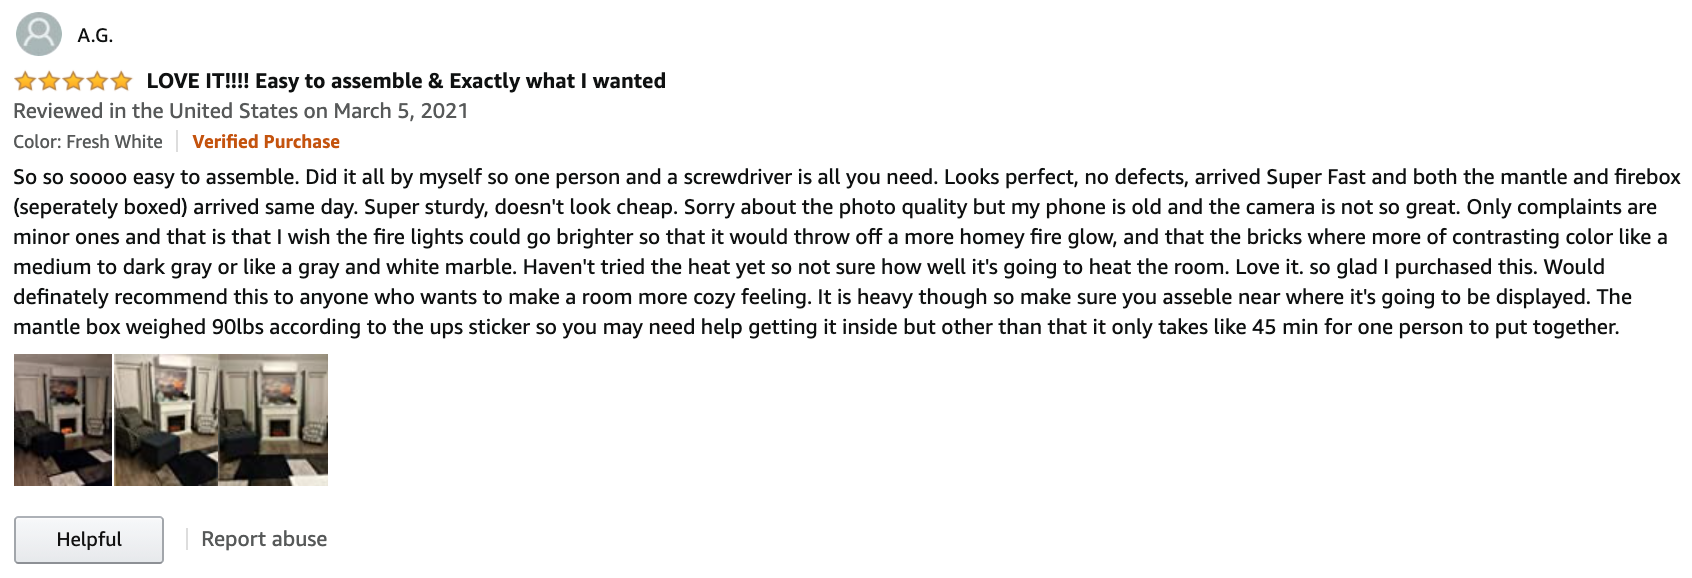 Corner Electric Fireplace 5-star Review screenshot from Amazon